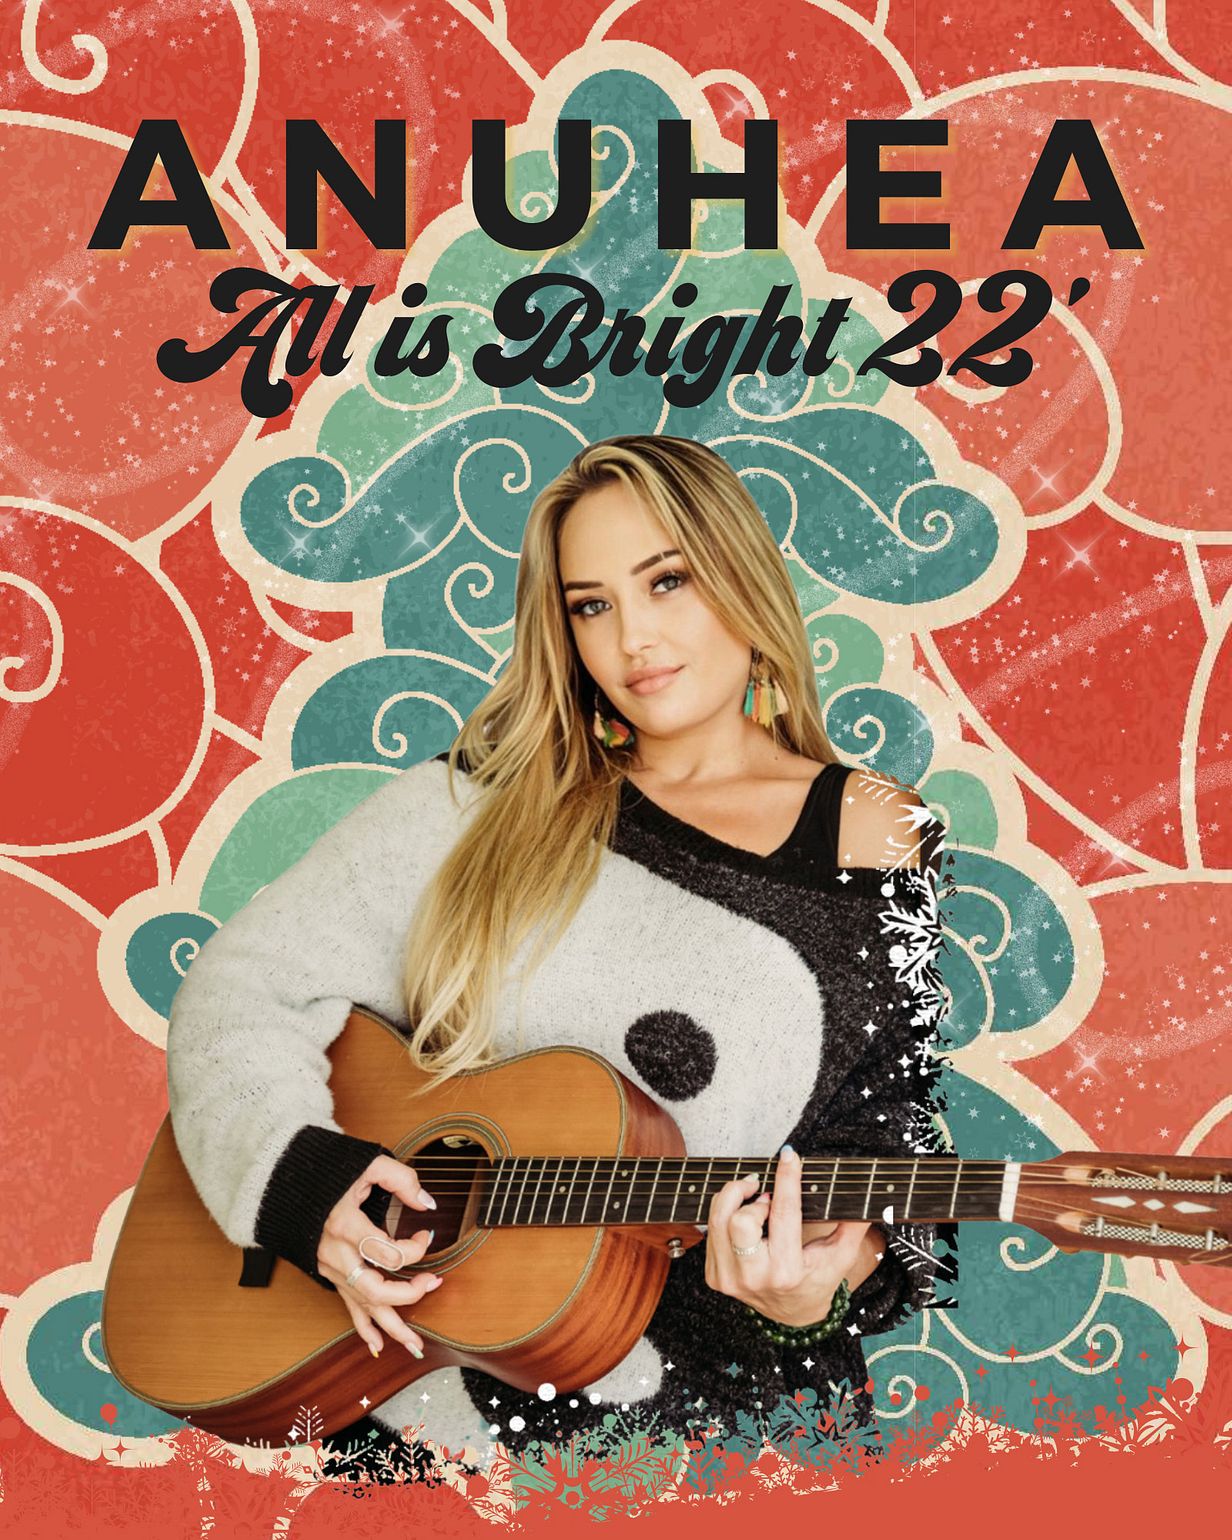 ANUHEA "All is Bright" tour with Keilana Tickets at Nectar Lounge in